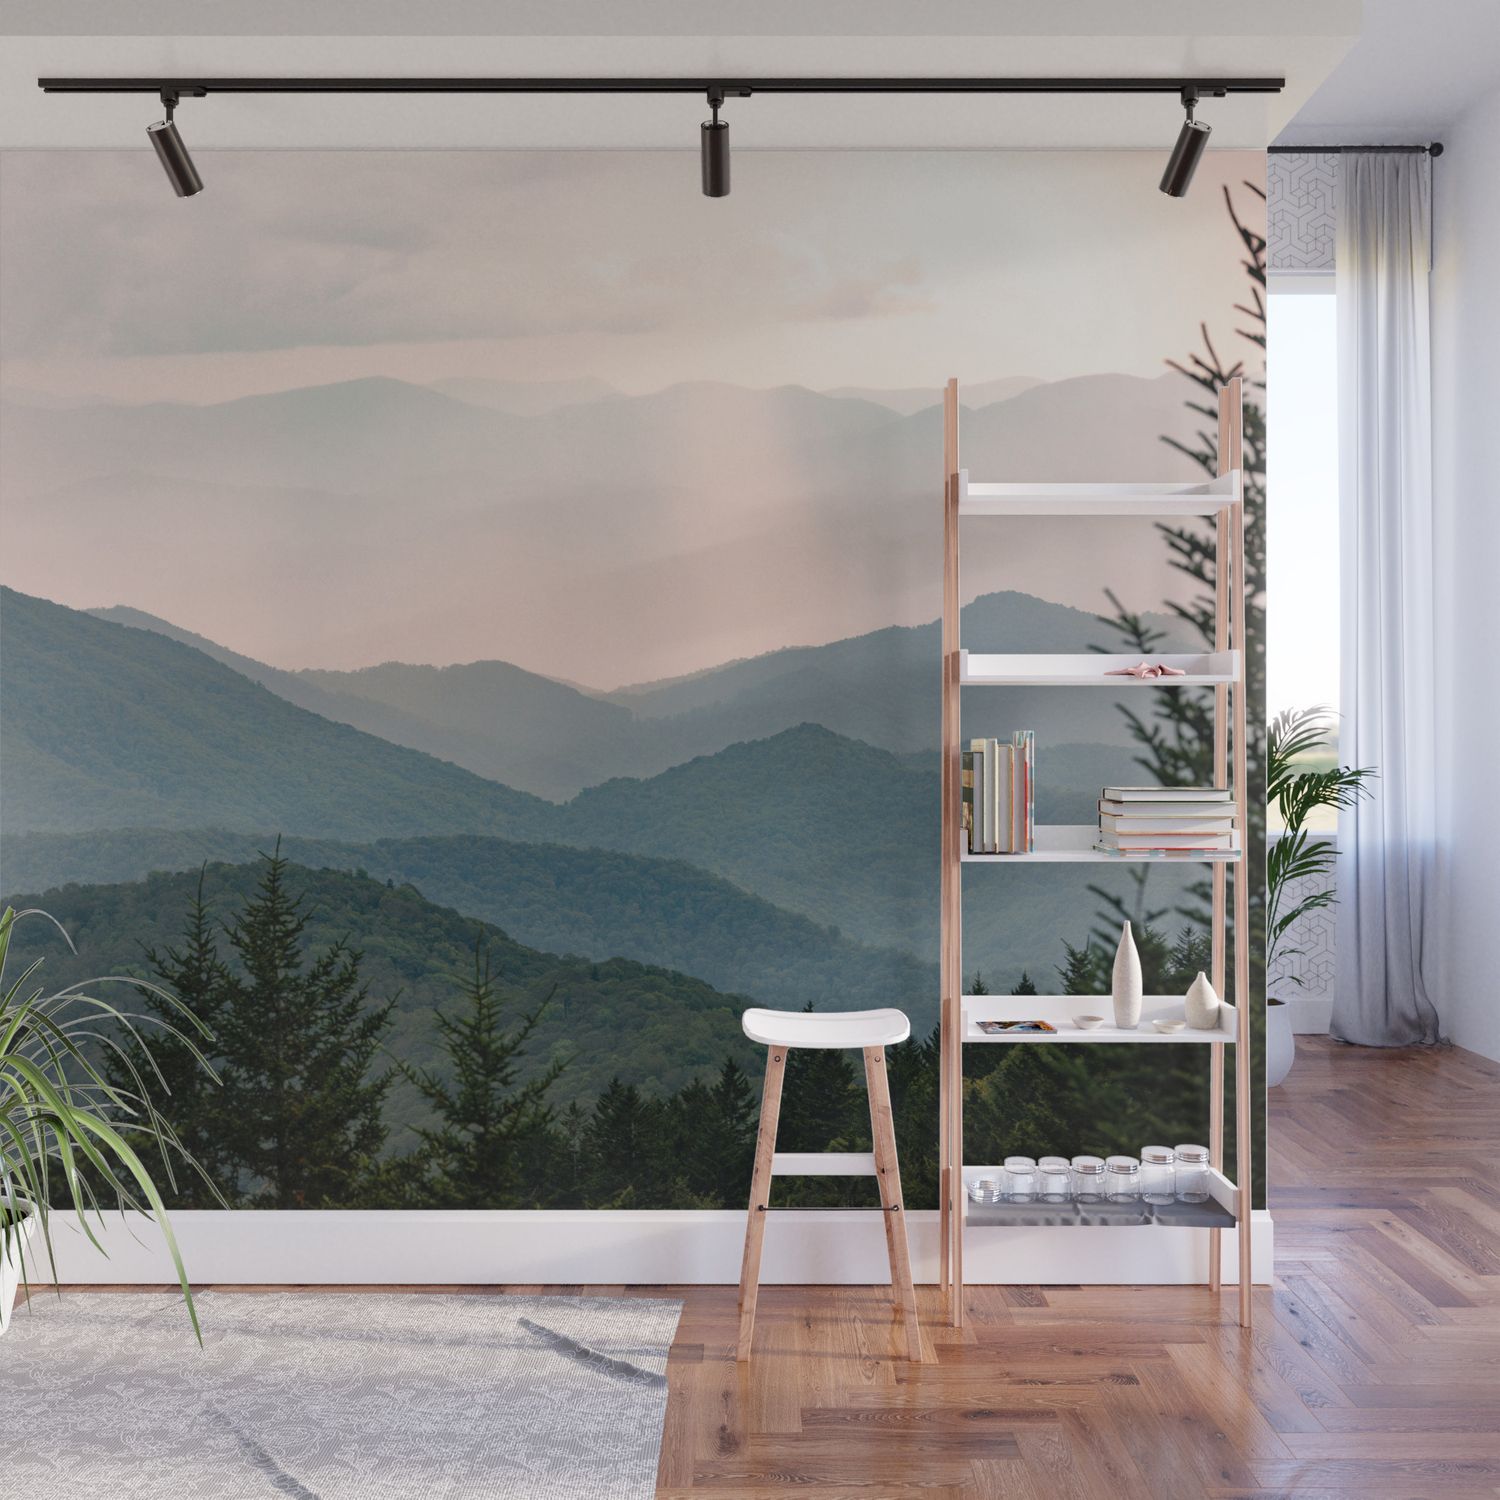 Smoky Mountain Pastel Sunset Wall Muralnature Magick Cascadia  Collection | Society6 Throughout Smoky Mountain Wall Art (View 6 of 15)